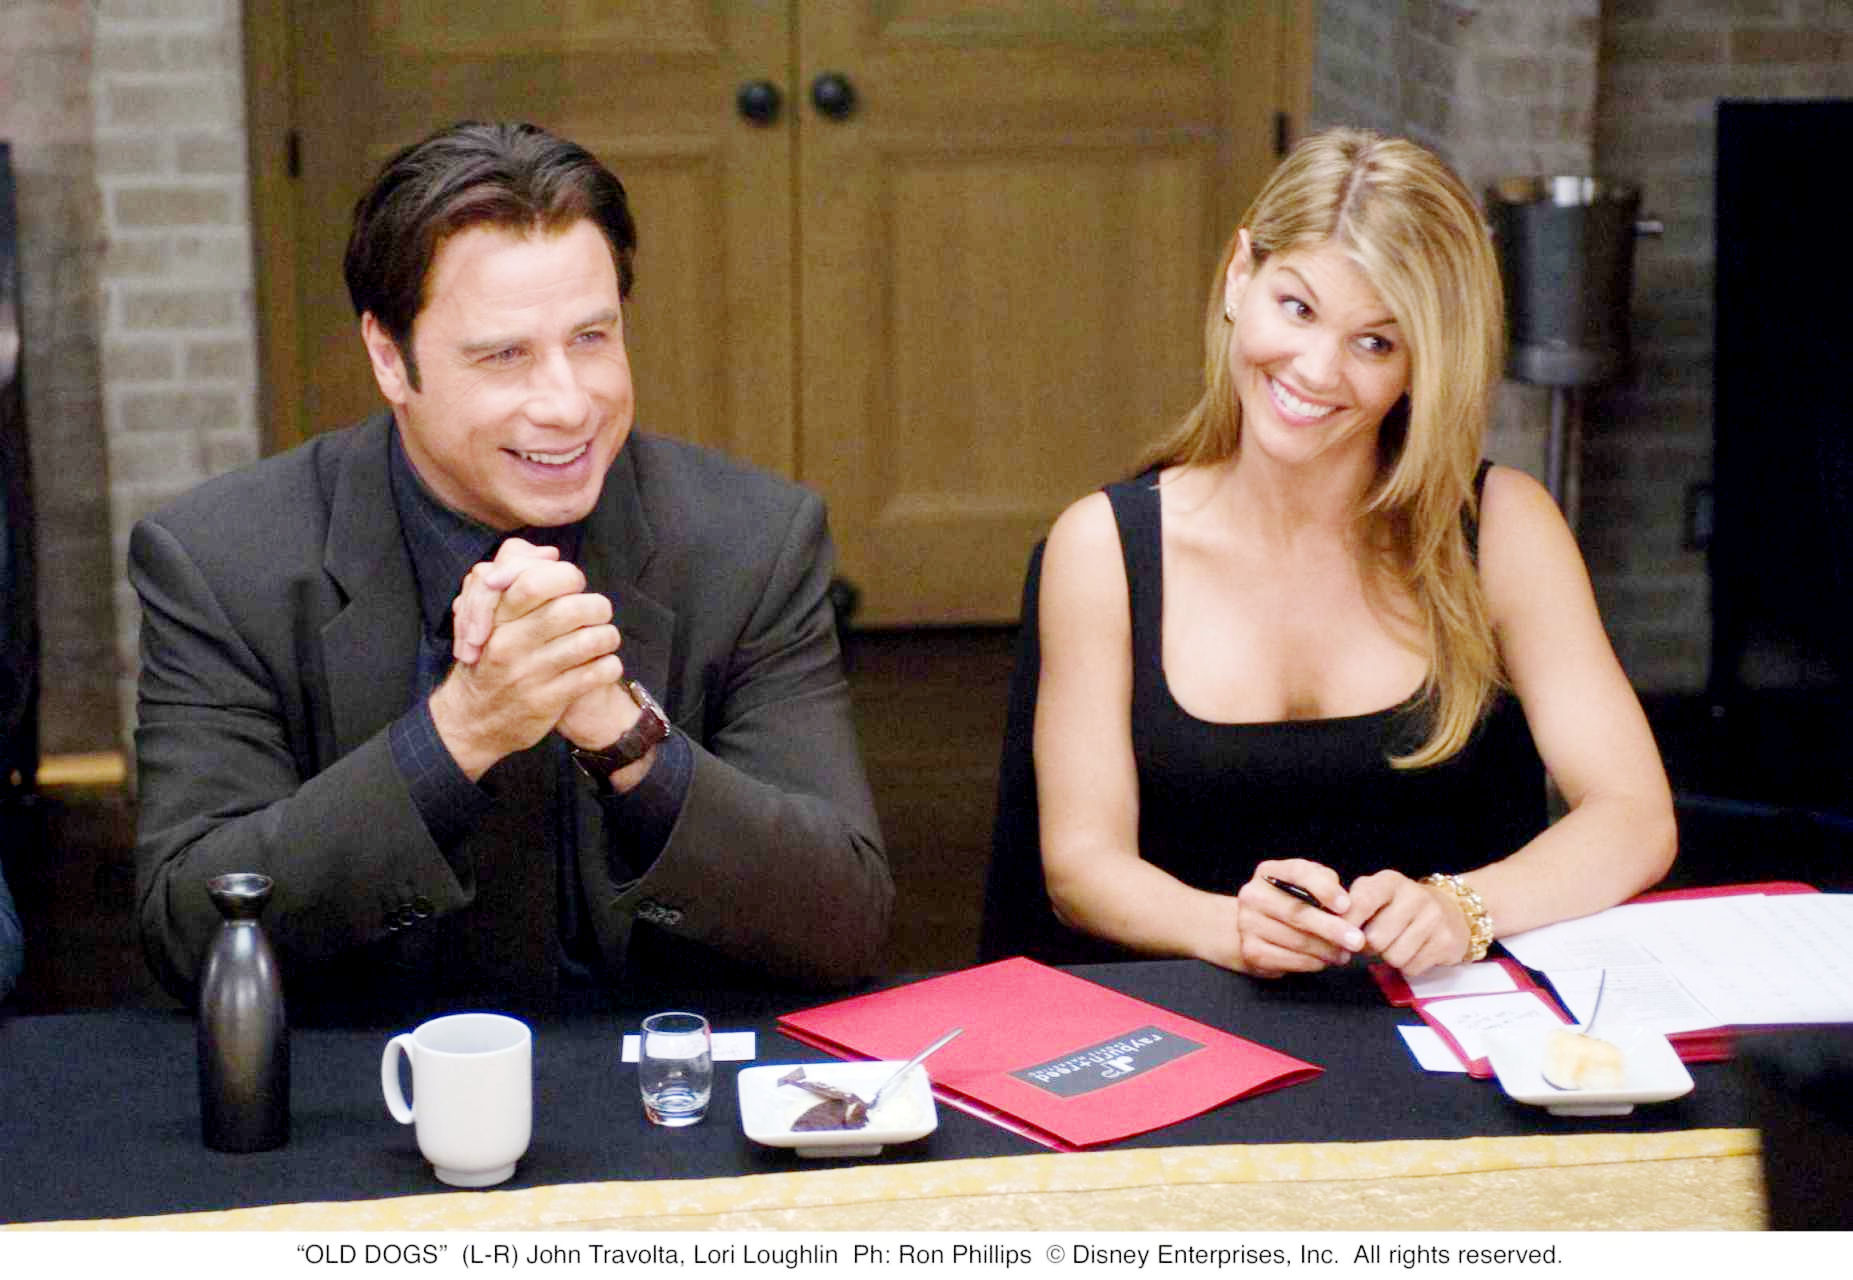 John Travolta (Charlie) and Lori Loughlin in Walt Disney Pictures' Old Dogs (2009). Photo credit by Ron Phillips.